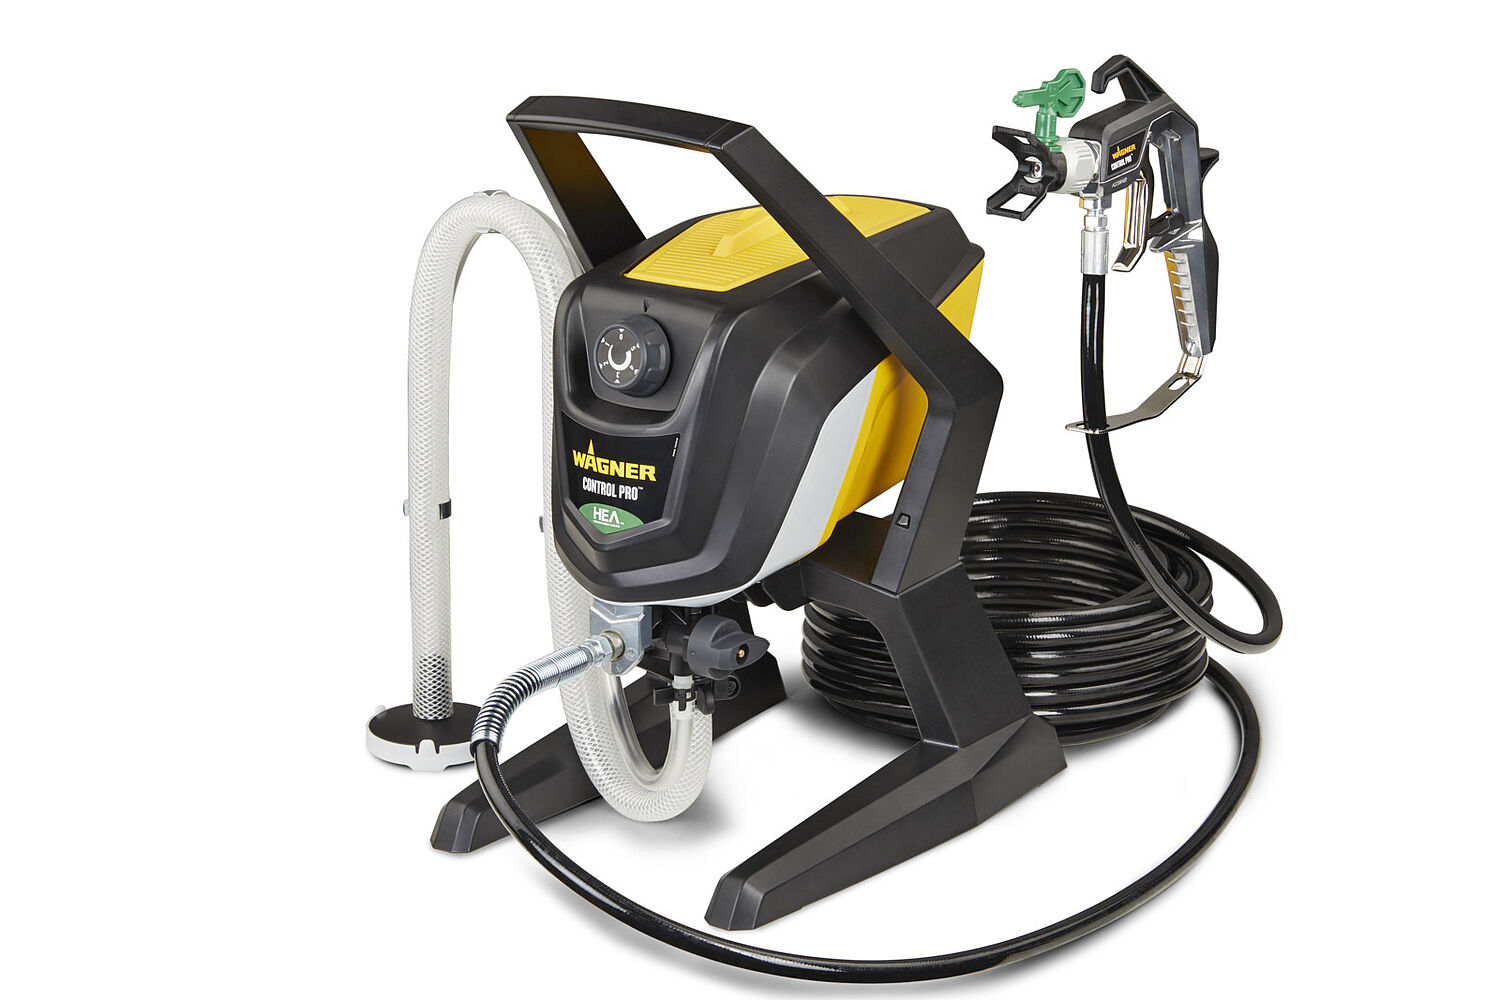 WAGNER SPRAY-SYSTEMS - WAGNER Airless Sprayer Control Pro 350 R